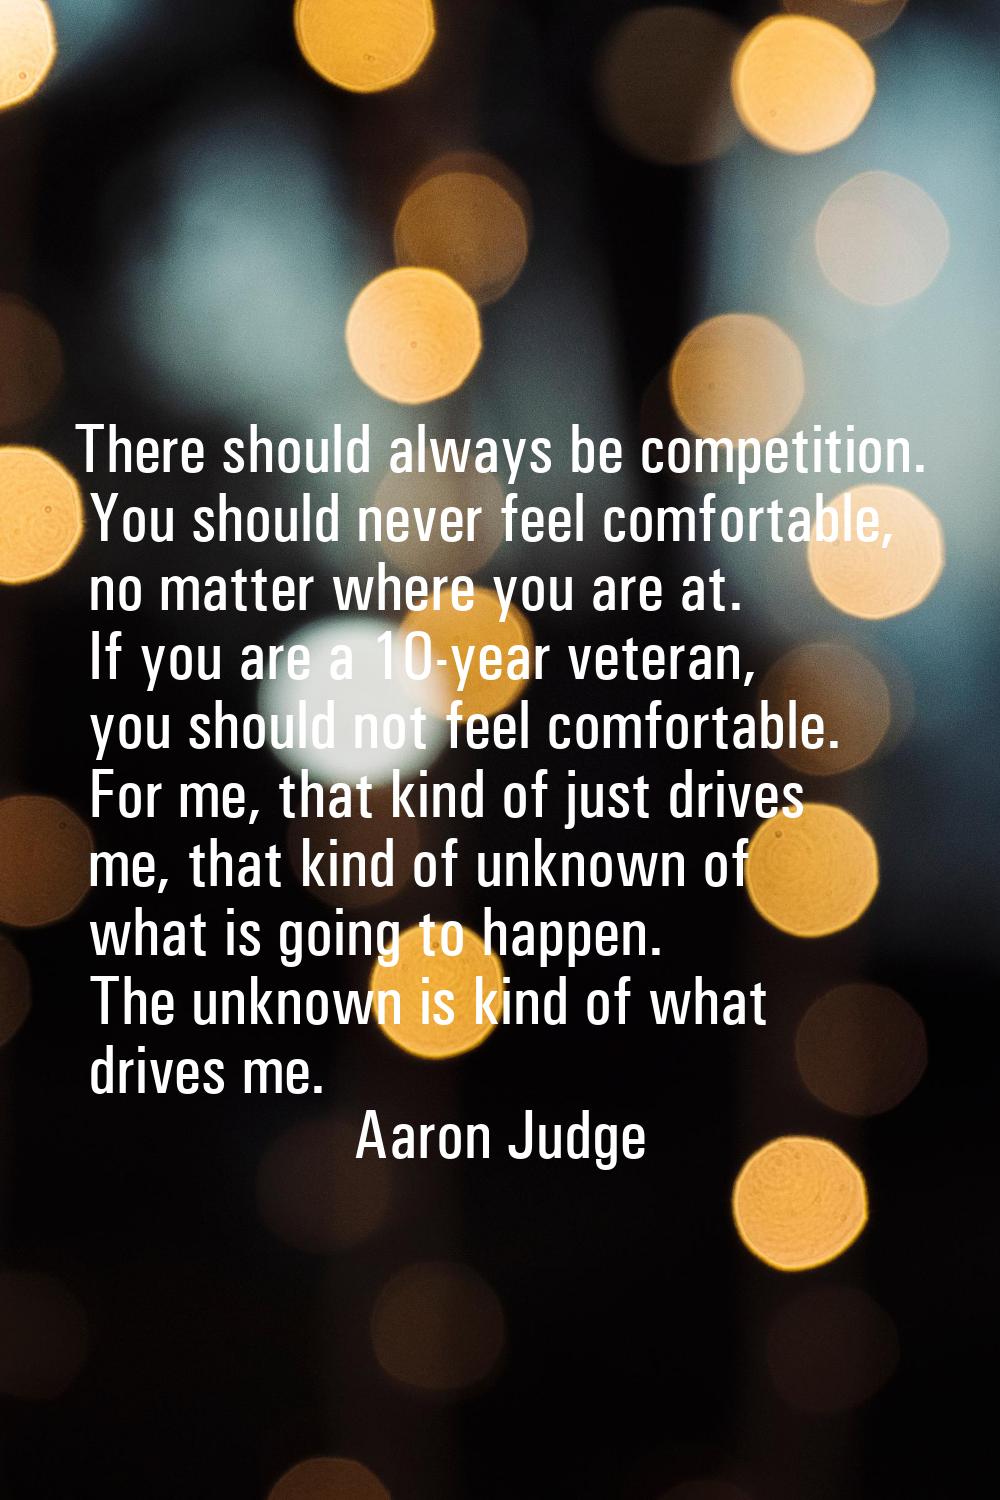 There should always be competition. You should never feel comfortable, no matter where you are at. 